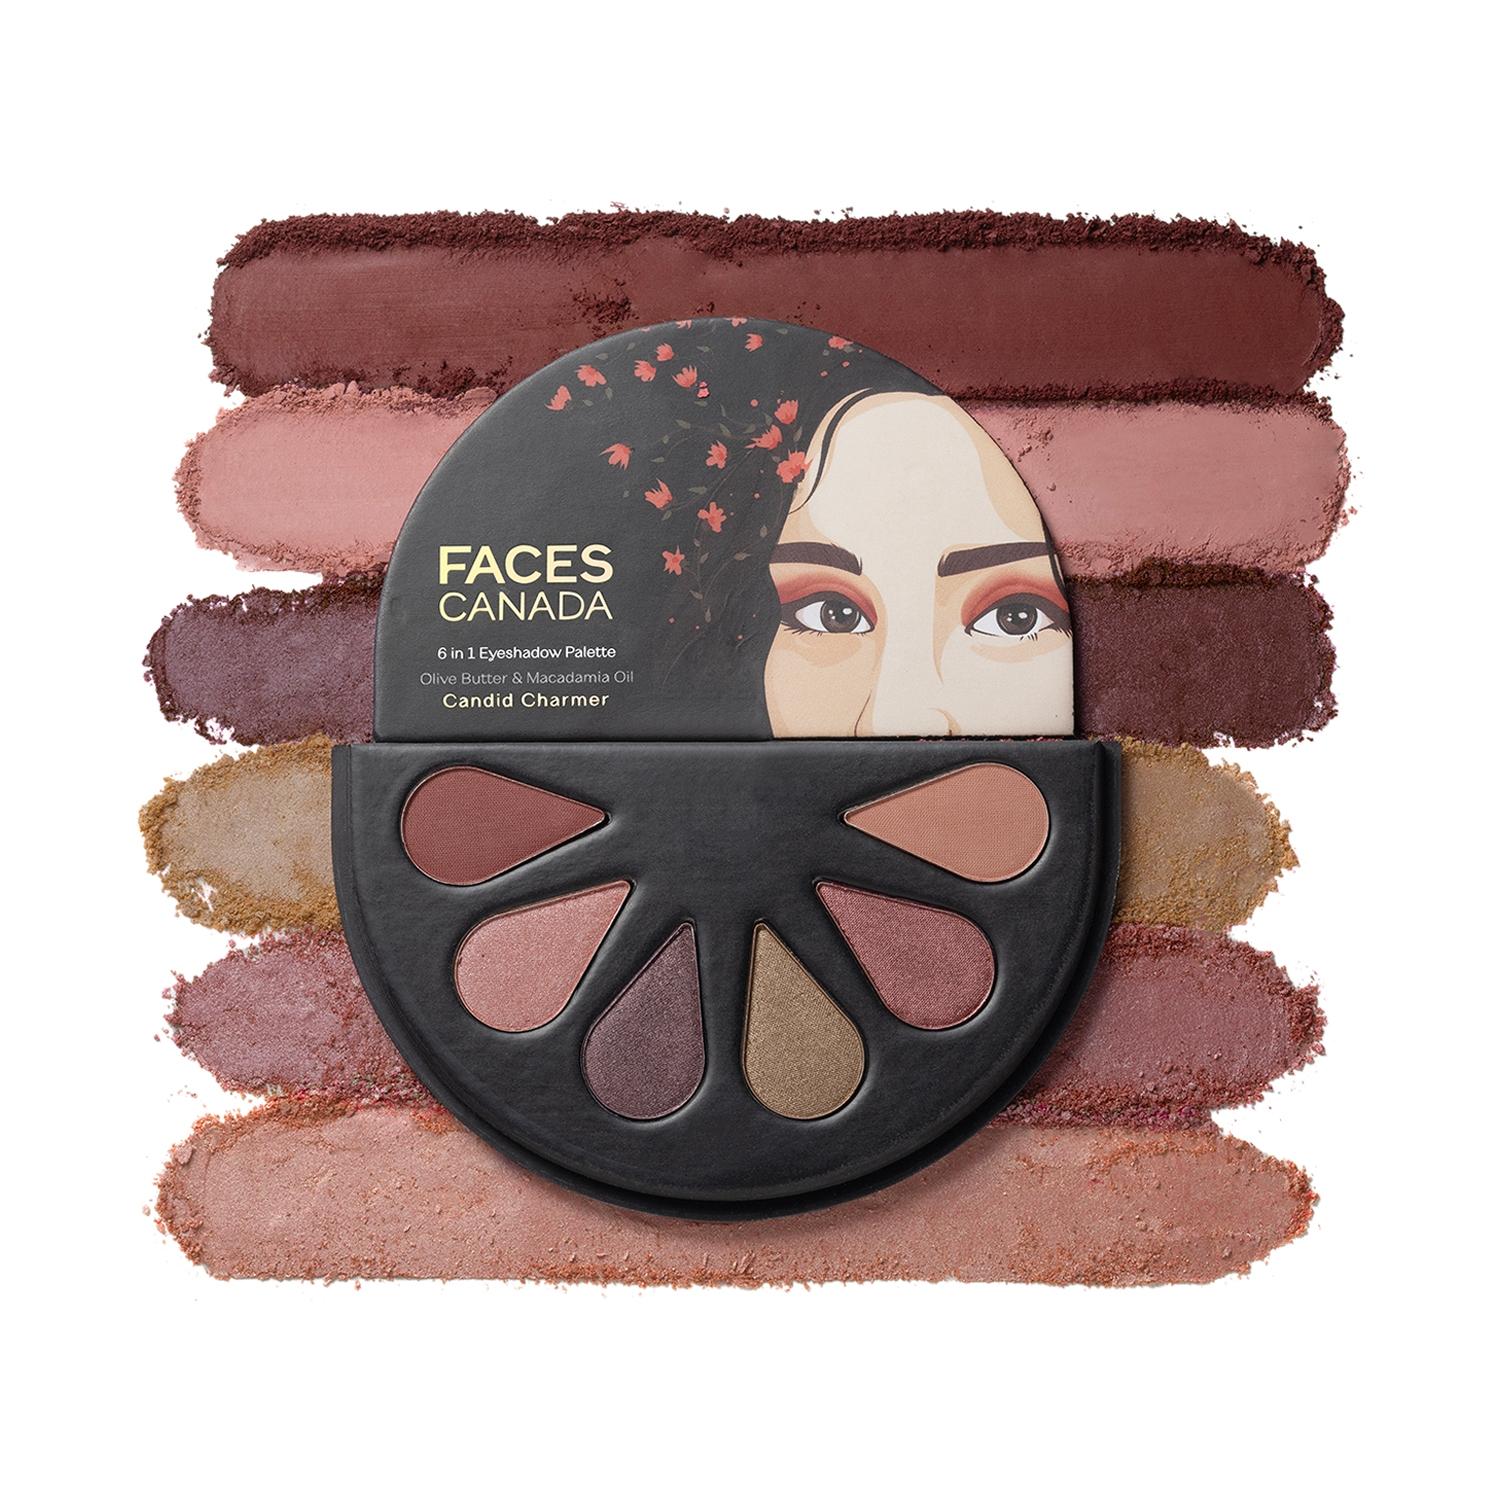 faces canada 6-in-1 eyeshadow palette - 02 candid charmer (6g)